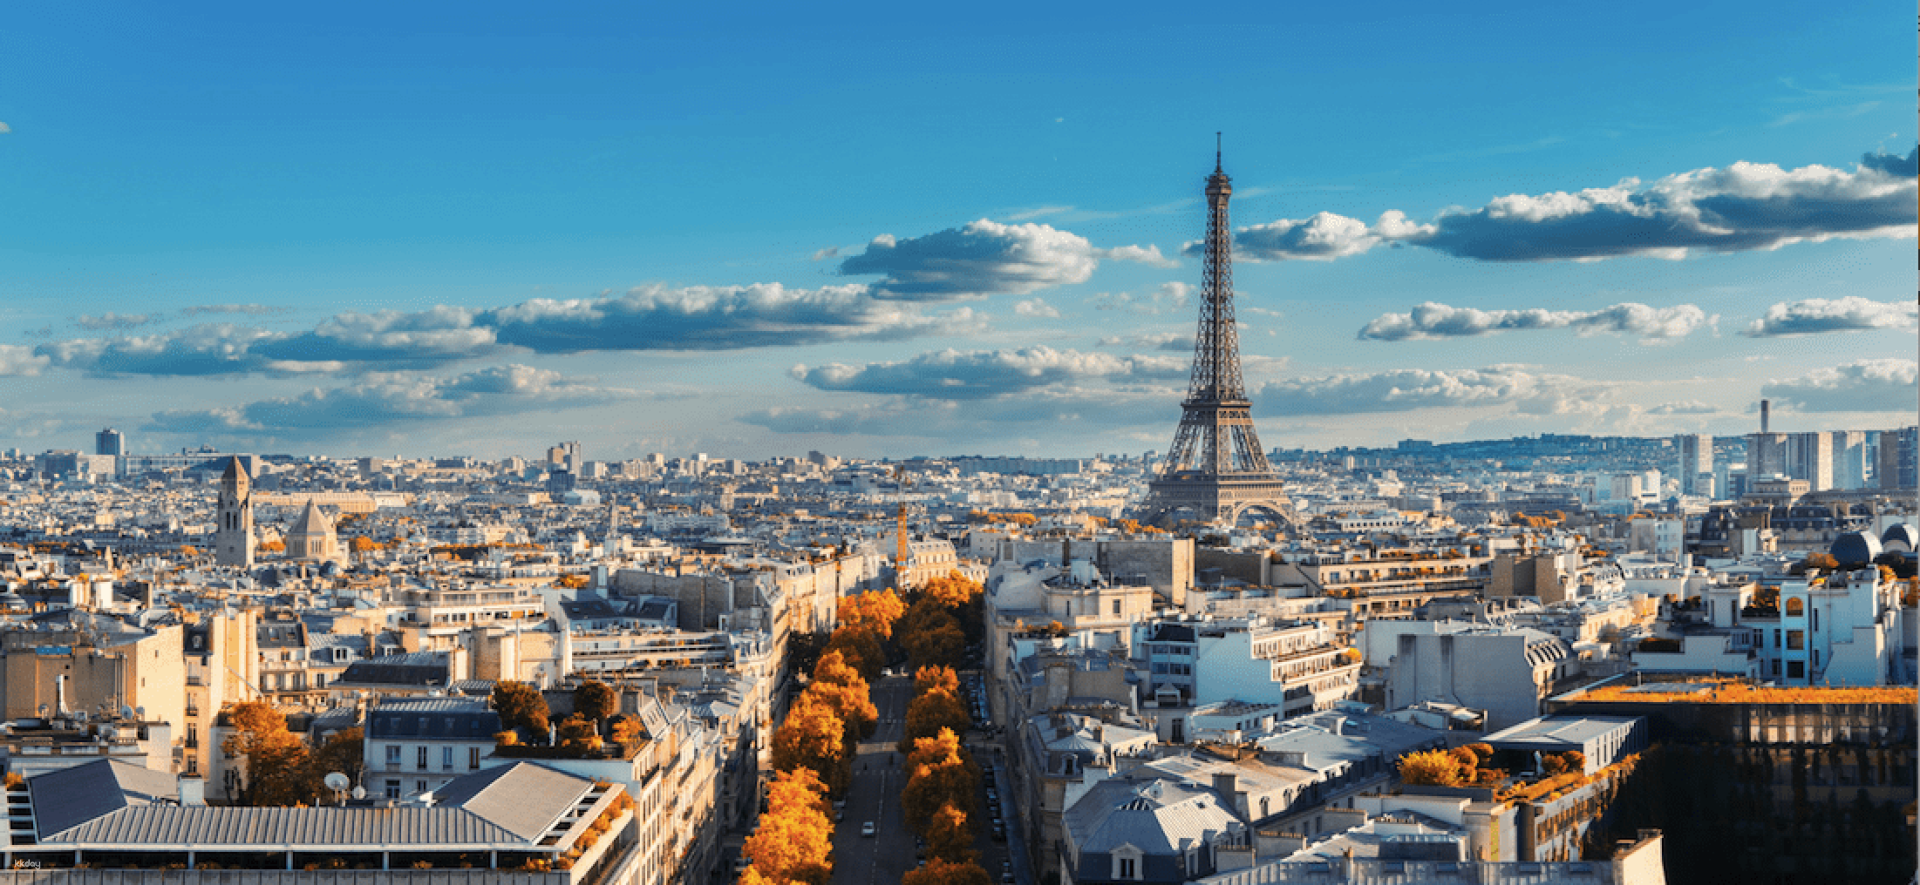 Charles de Gaulle Airport (CDG) Private Transfer to Downtown Paris E-ticket